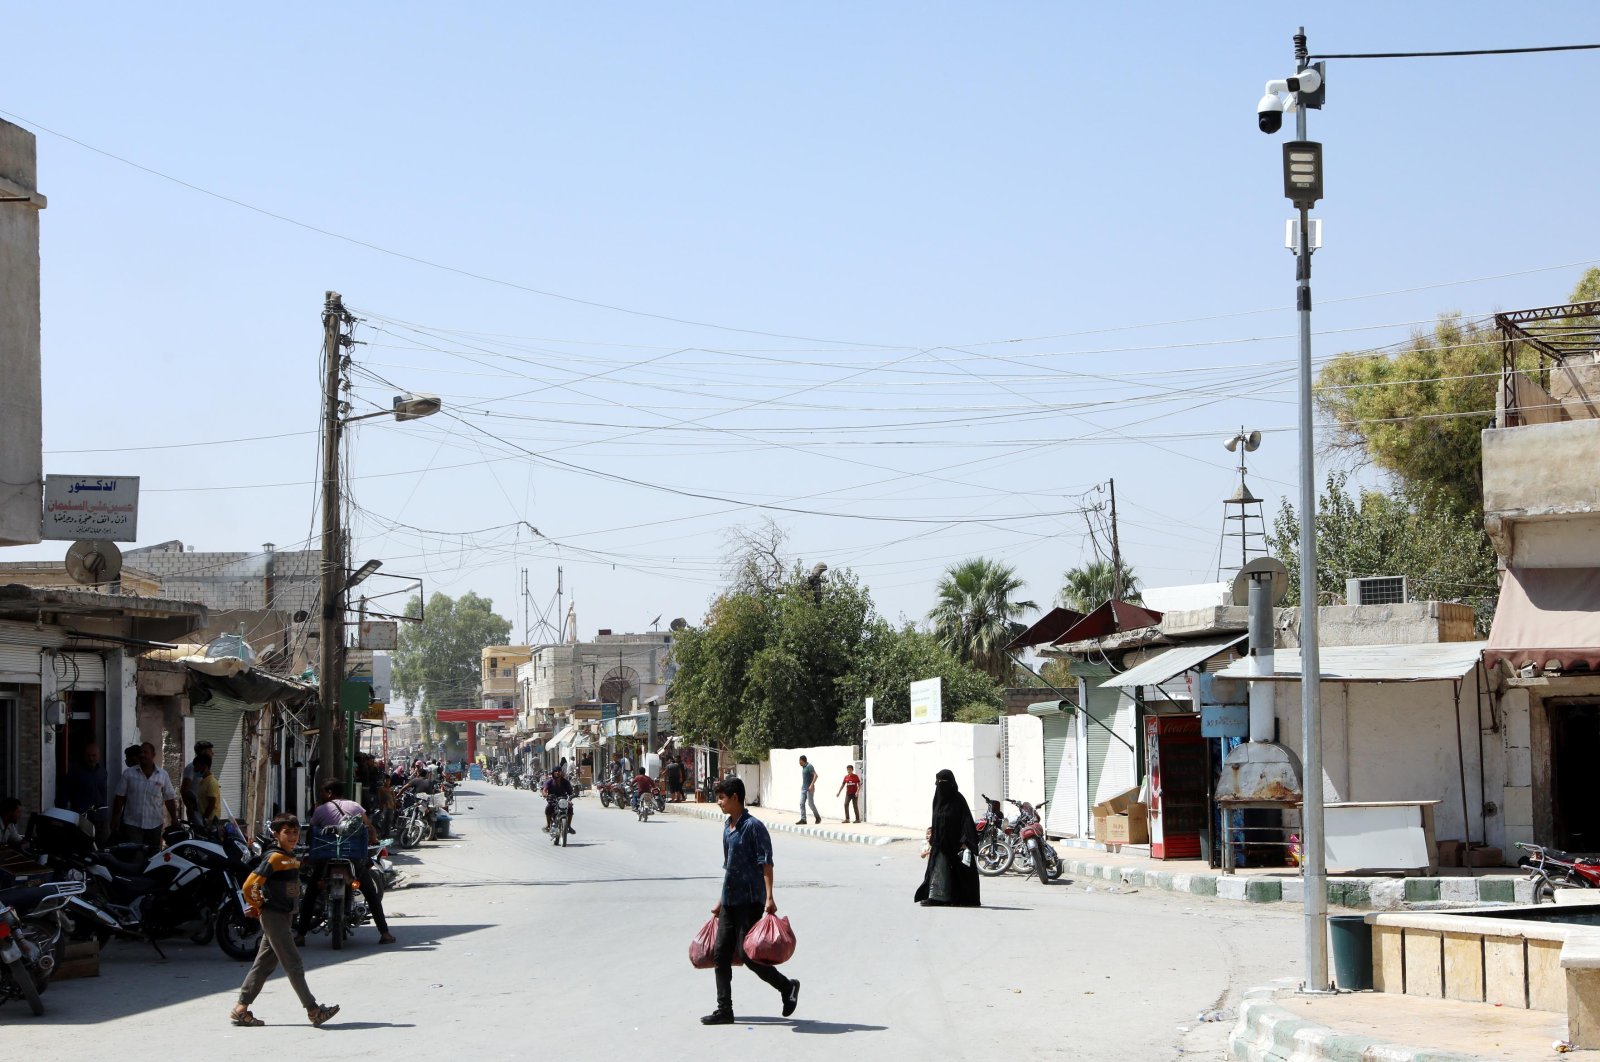 A video surveillance system monitors the streets of northern Syria's Tal Abyad, Sept. 21, 2020. (DHA Photo)